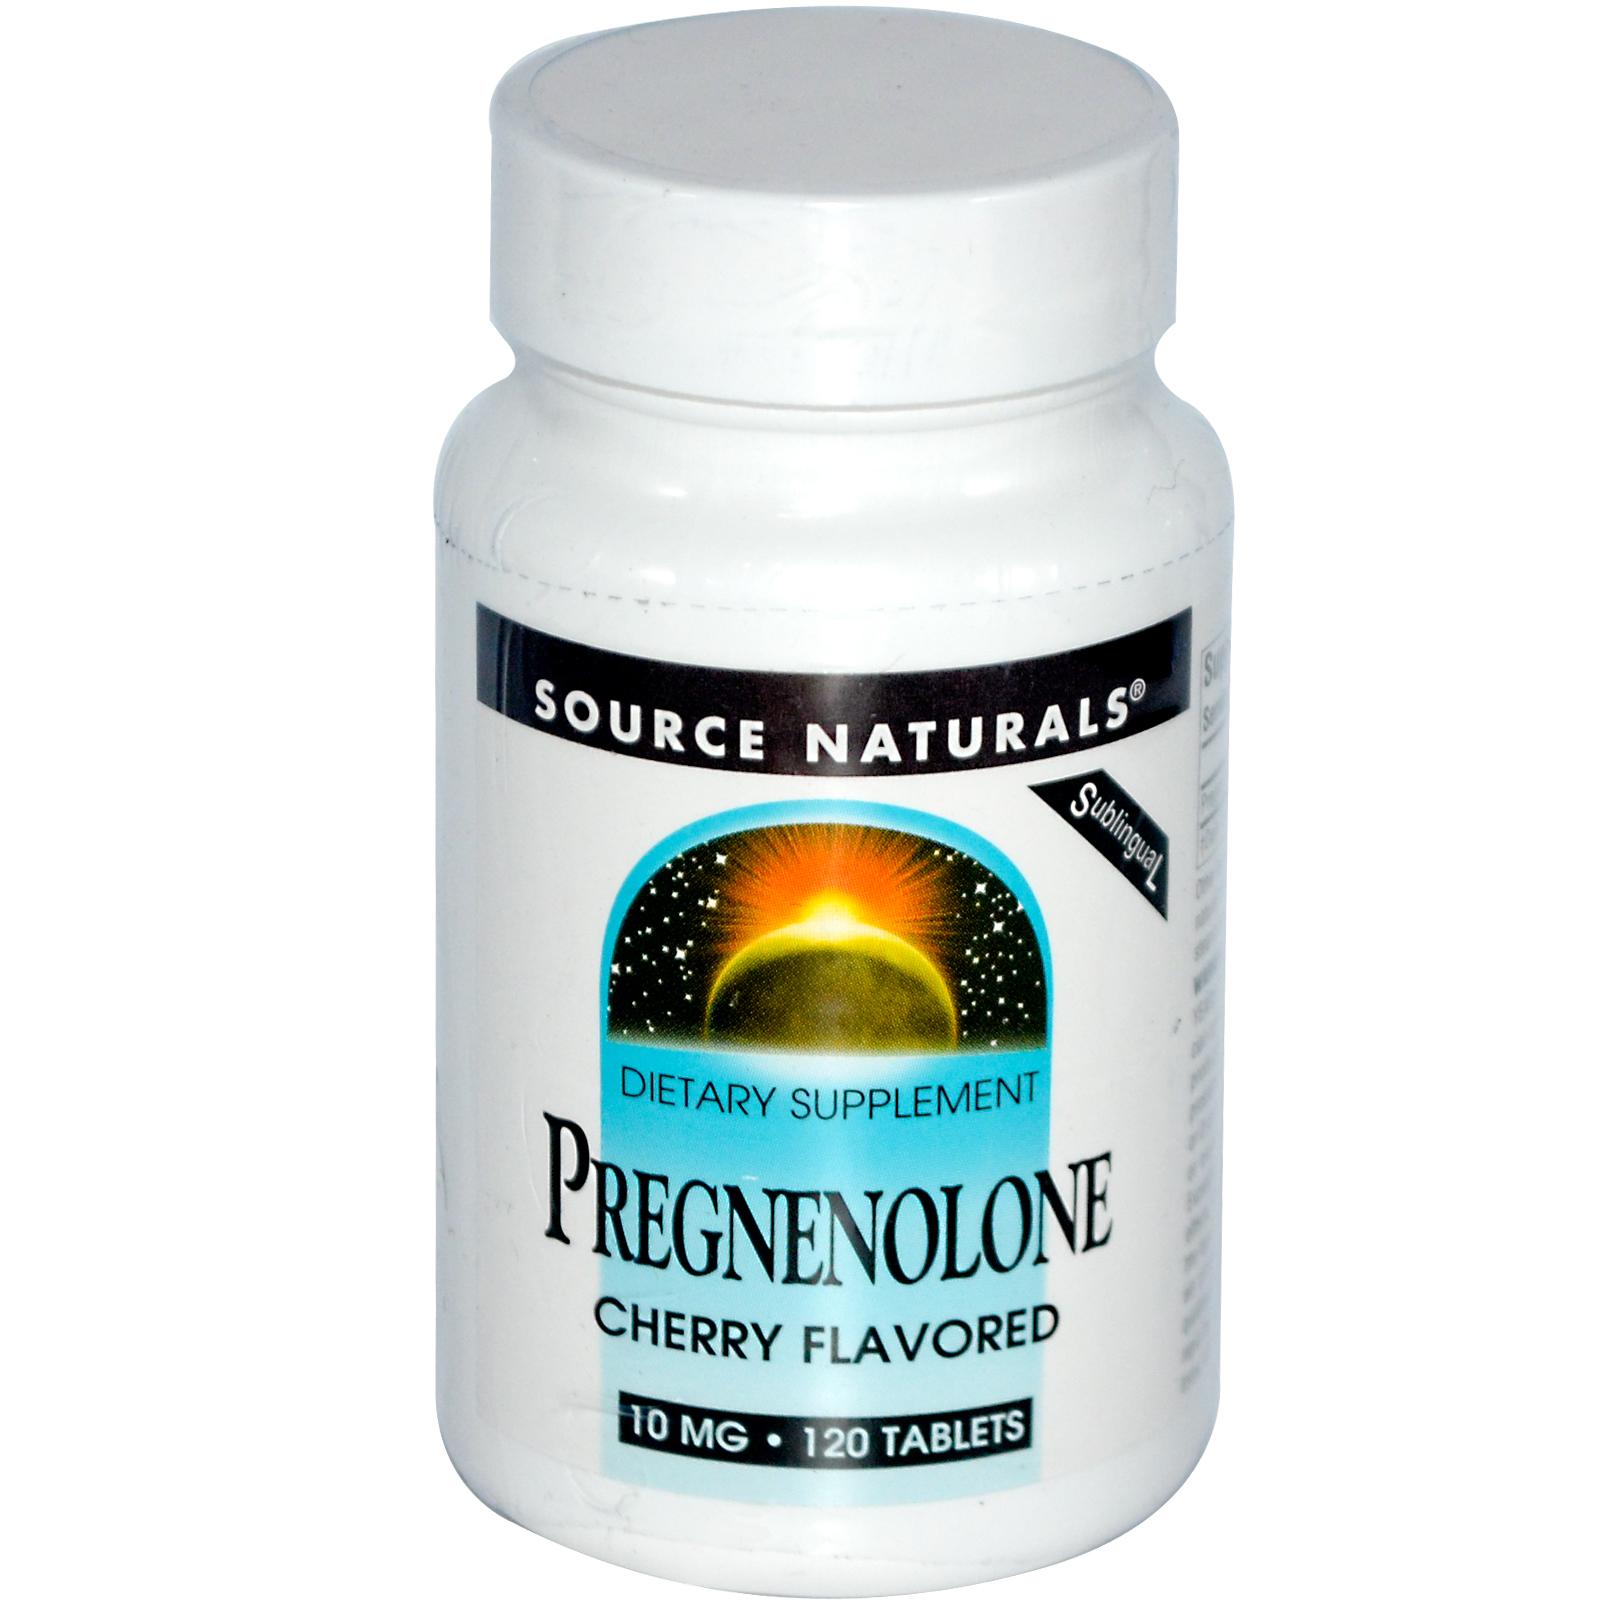 A Pregnenolone Sumpplement for Adrenal Fatigue